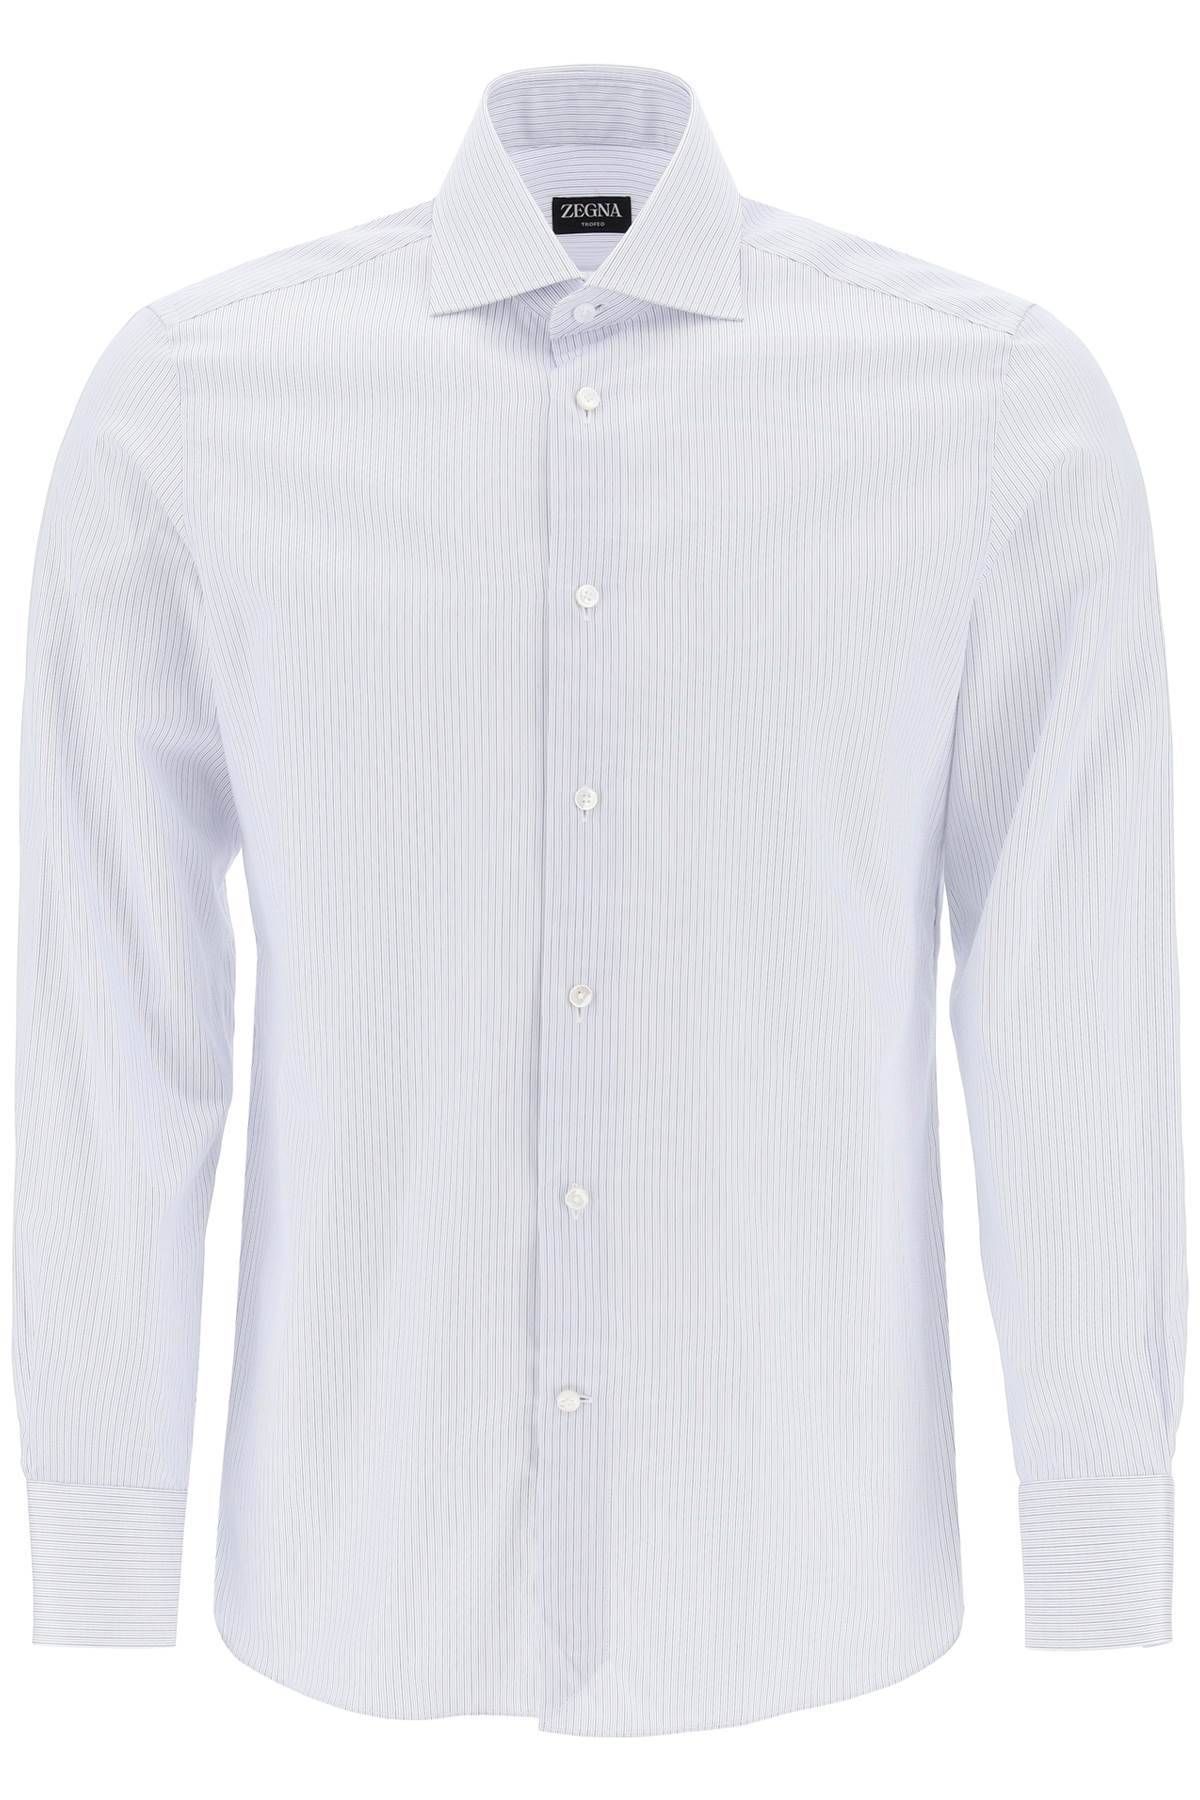 zegna ZEGNA striped shirt with french collar